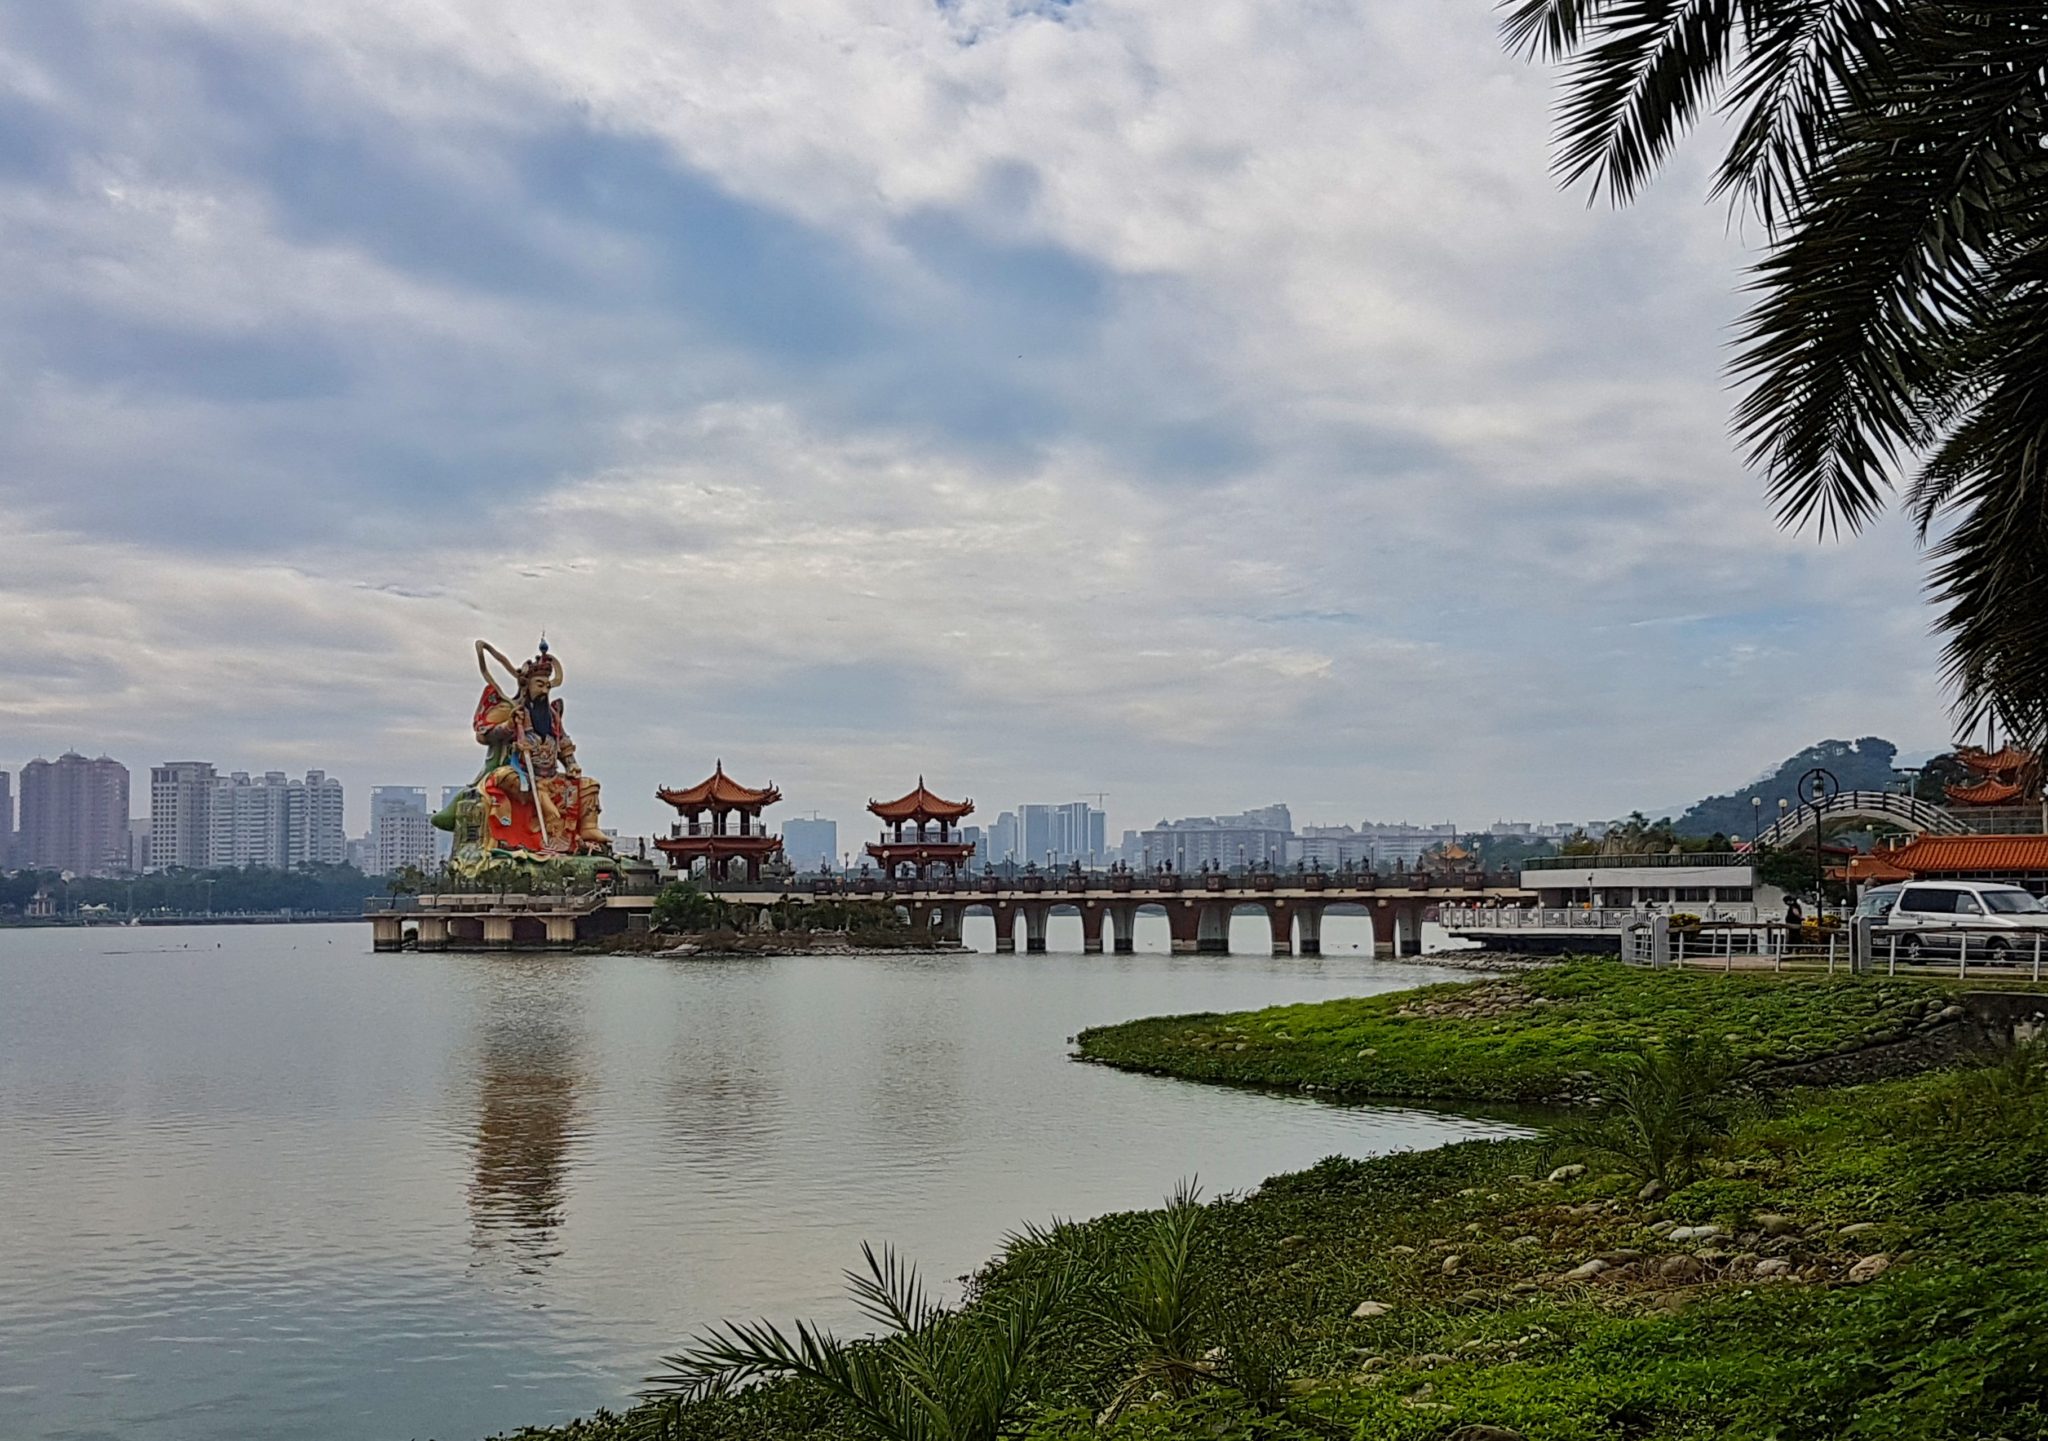 A lake with green banks and a big statue and pagodas in the middle and buildings in the background